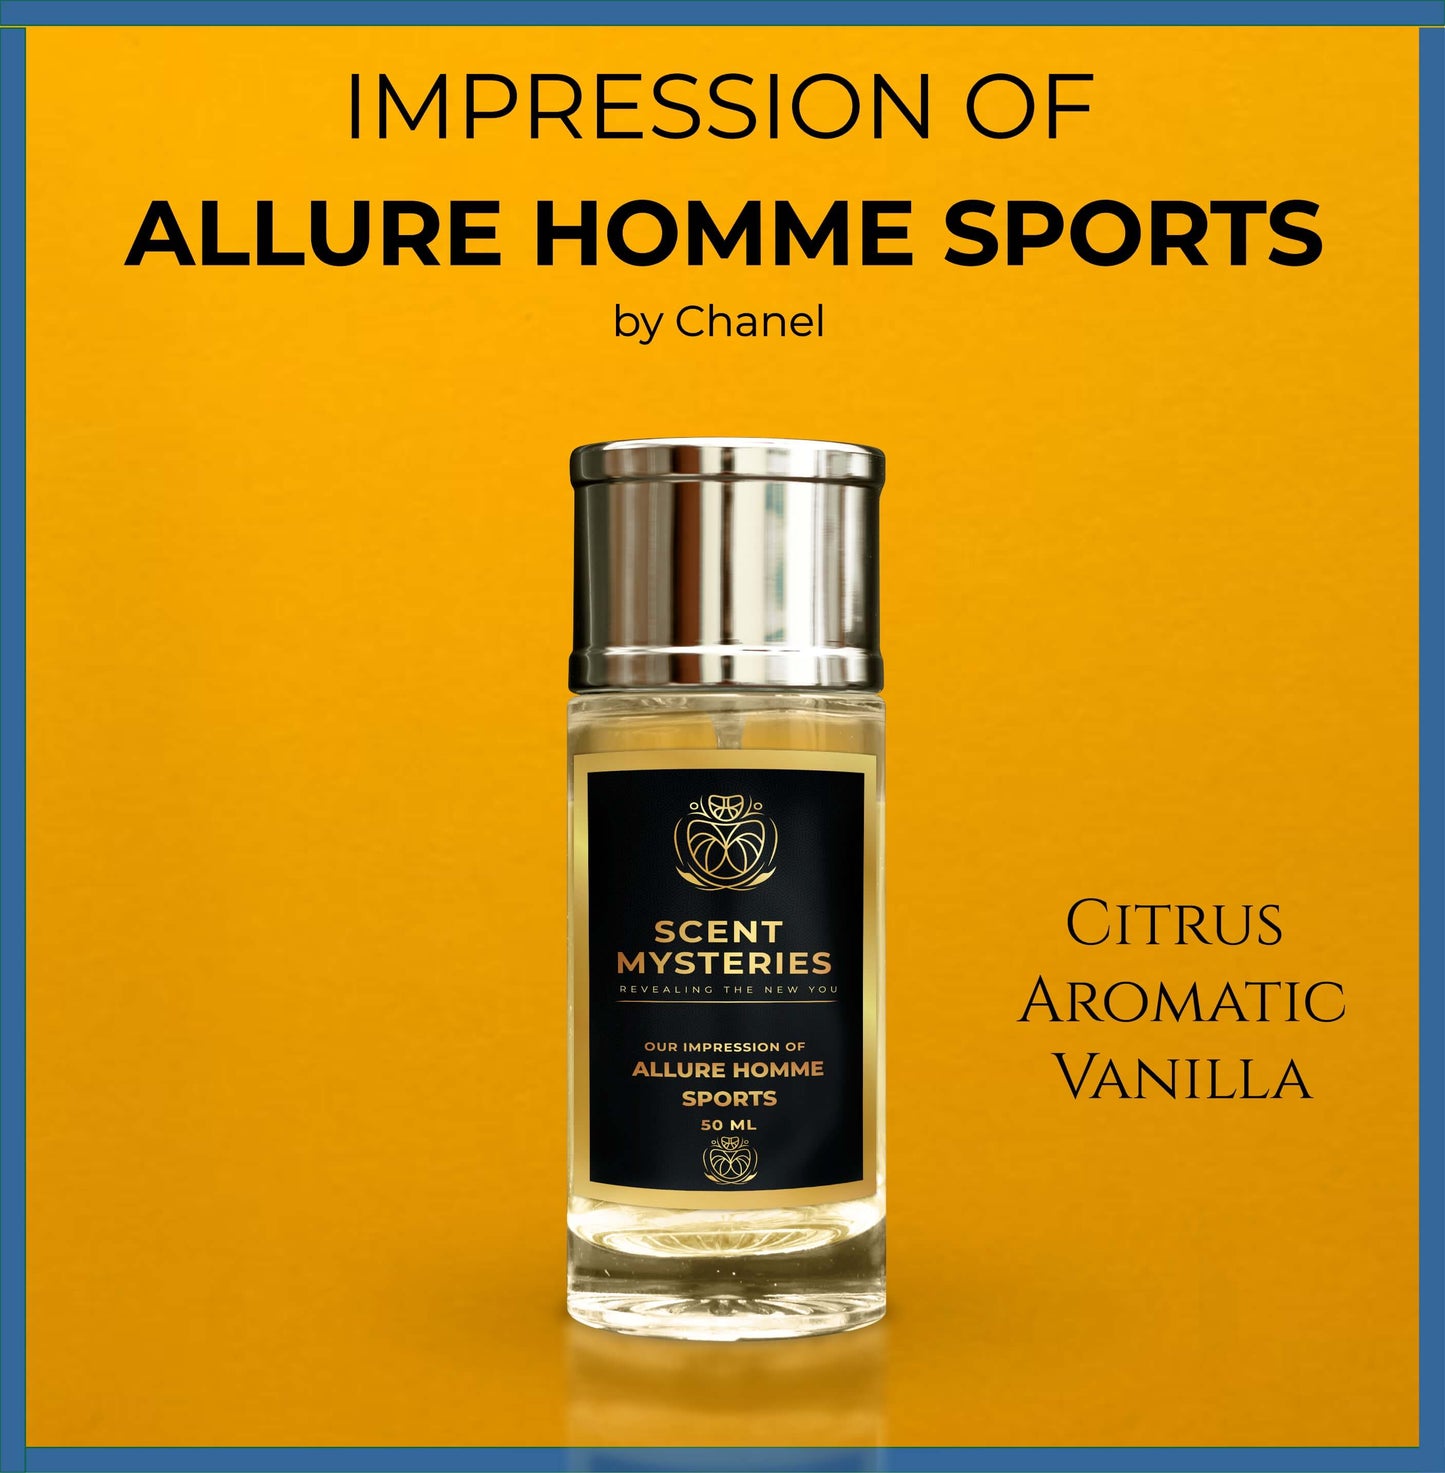 Impression of Allure Homme Sports